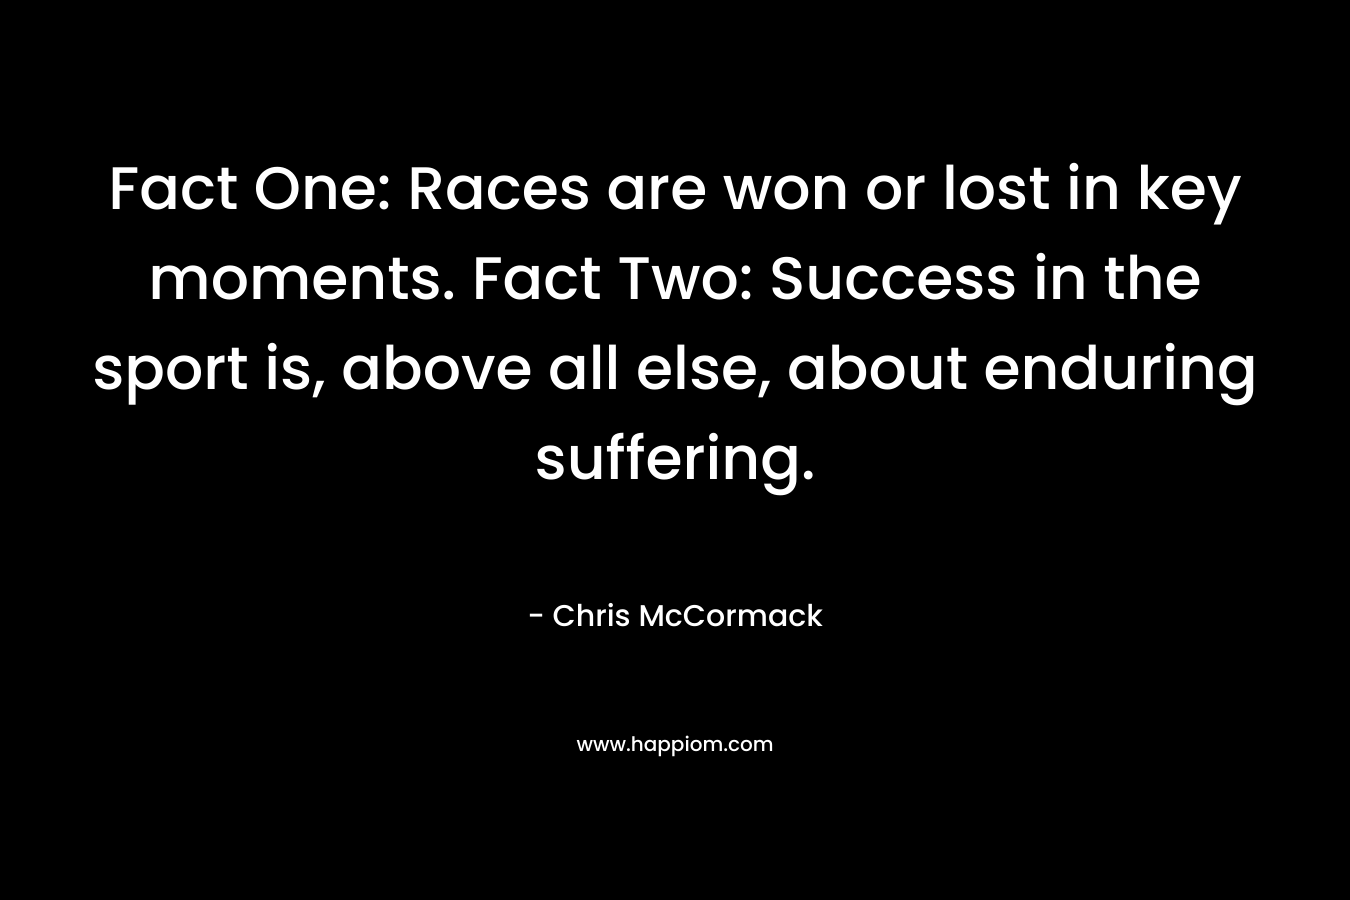 Fact One: Races are won or lost in key moments. Fact Two: Success in the sport is, above all else, about enduring suffering. – Chris McCormack